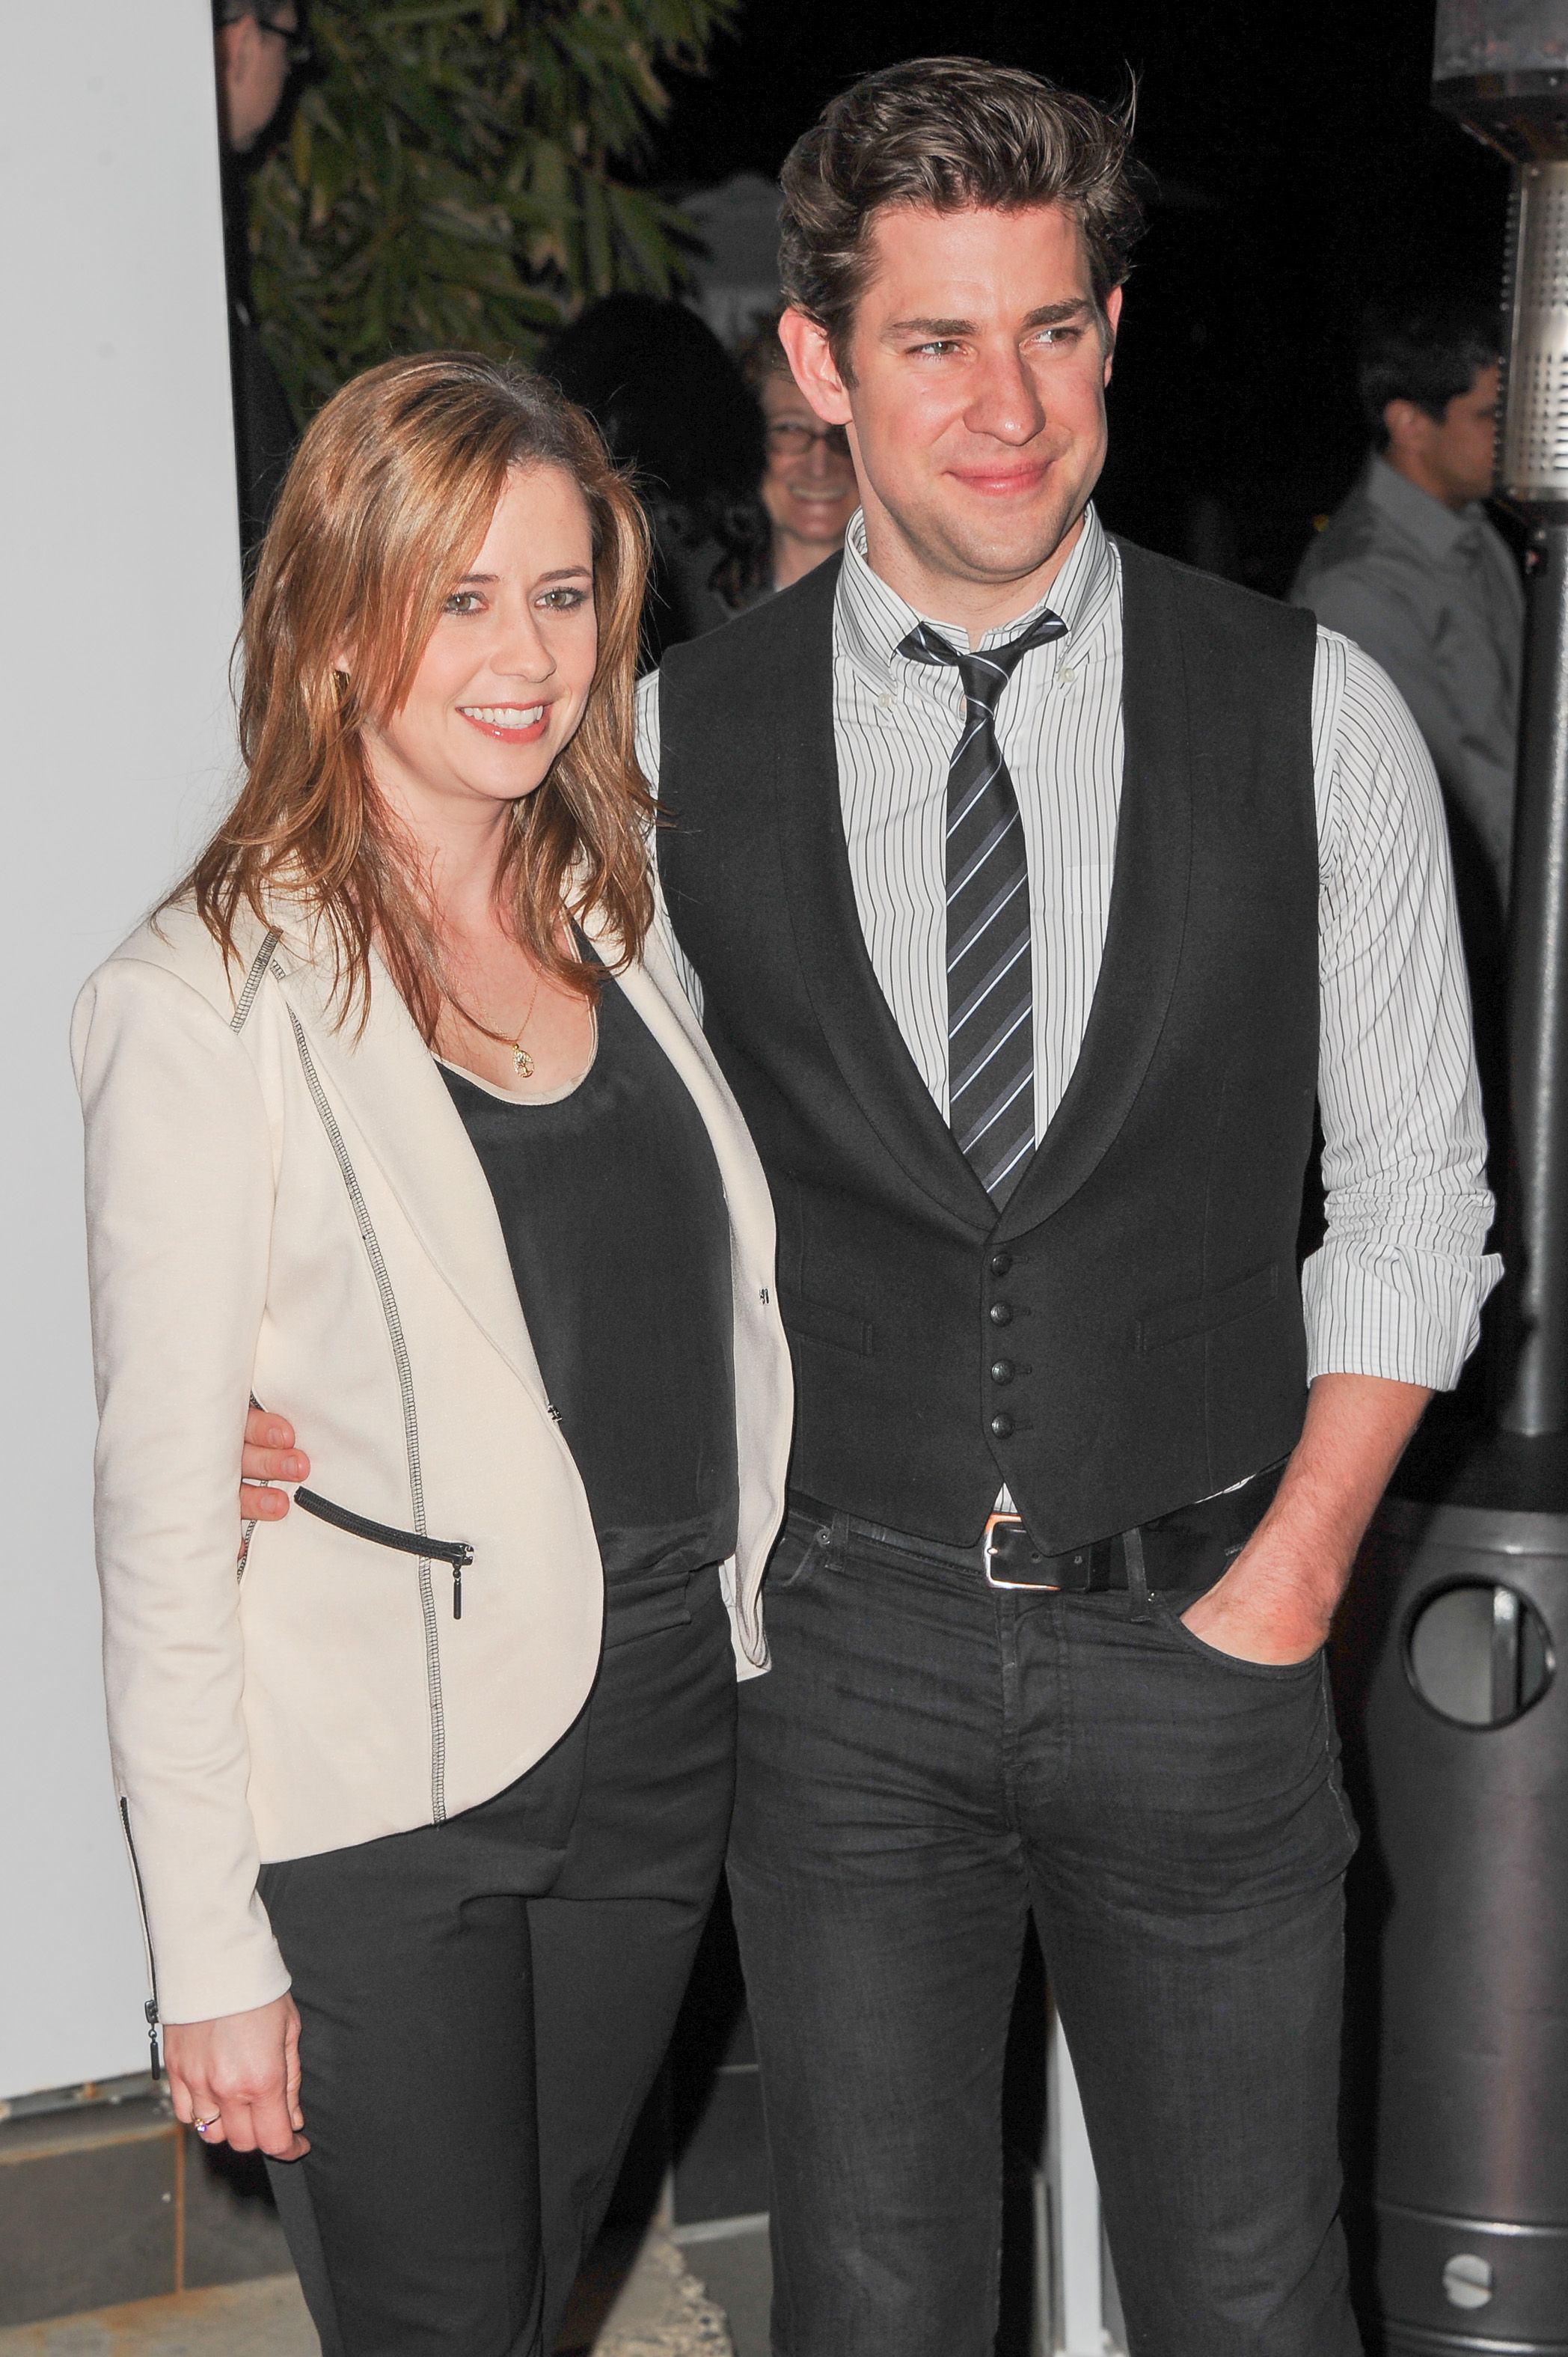 Jenna Fischer Admitted That At Times Her Relationship With John Krasinski In The Office Was The